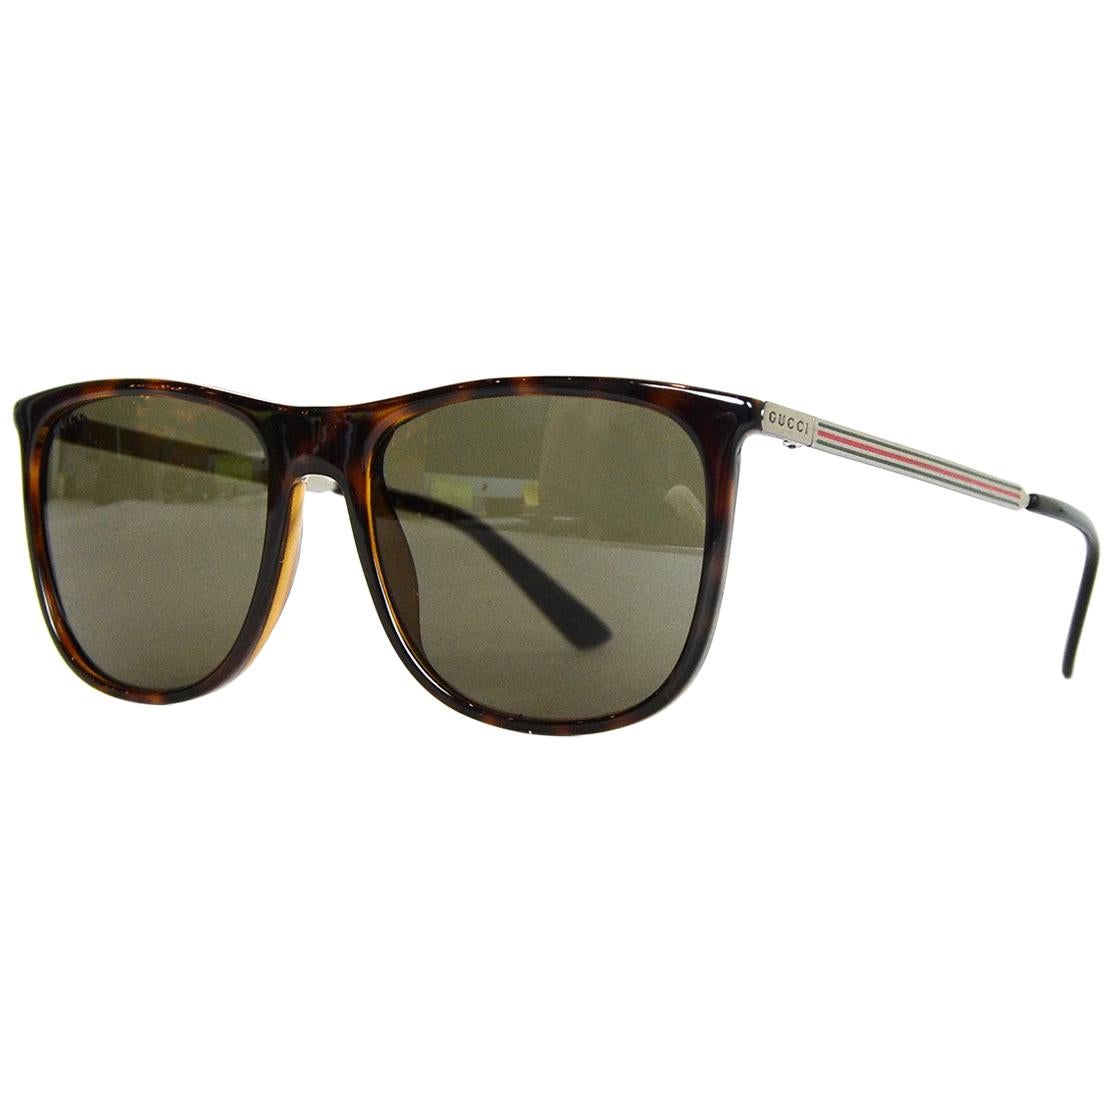 Gucci Brown Square-Frame Acetate Sunglasses W/ Metal Red/Green Arm Web